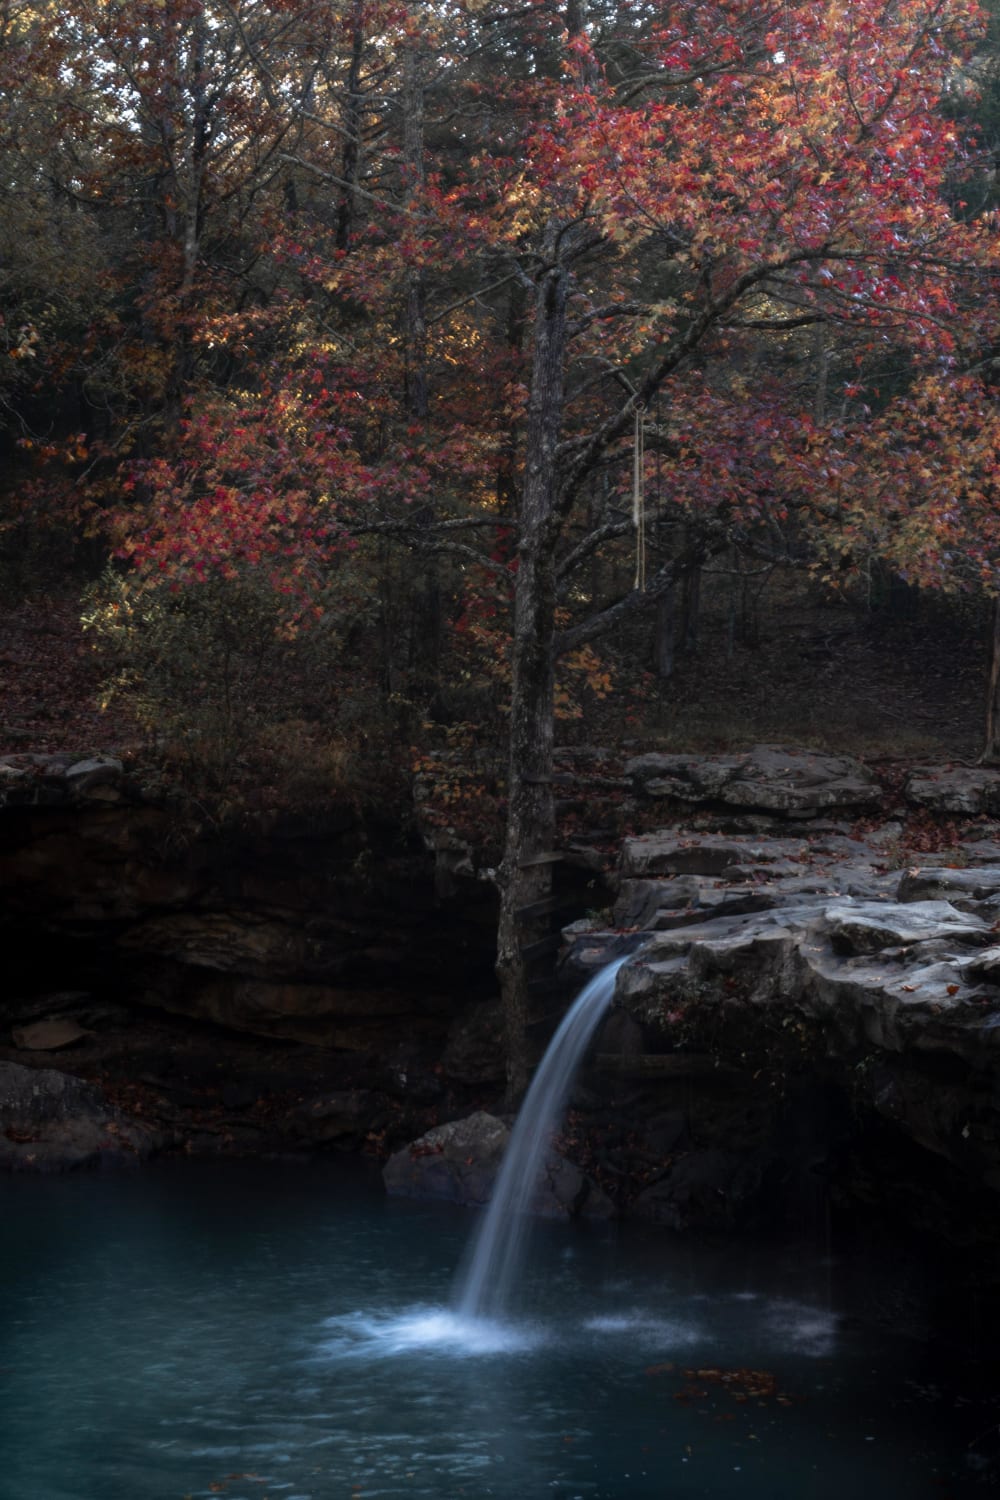 This zen little waterfall with a maple behind it and deep blue pools below it. Falling Water Falls, Arkansas.